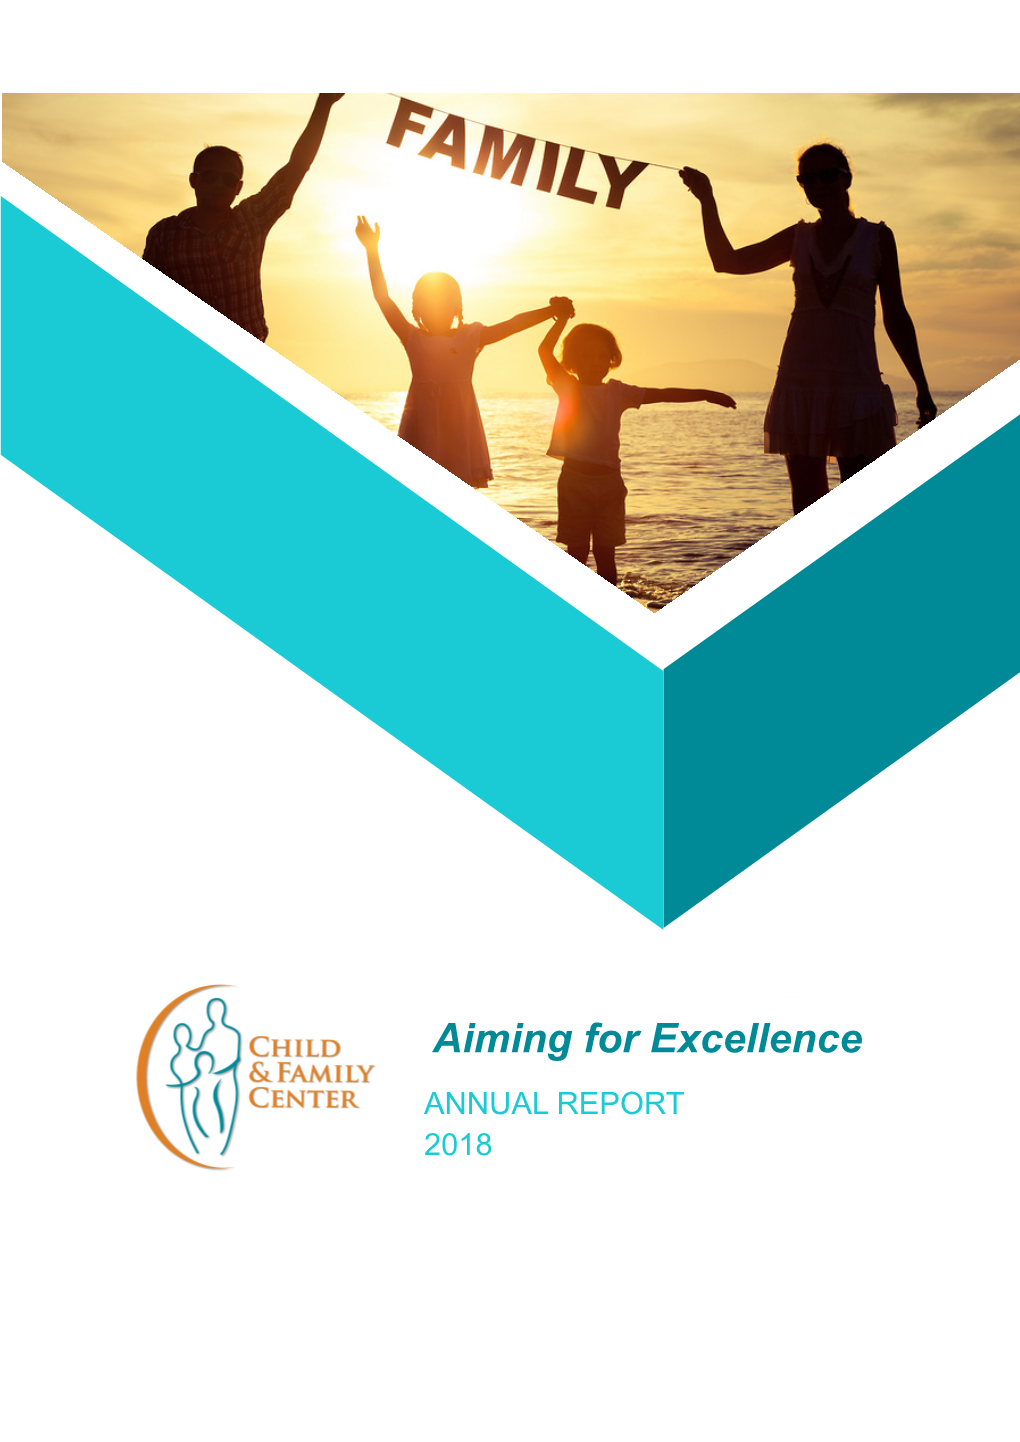 View the 2018 Annual Report